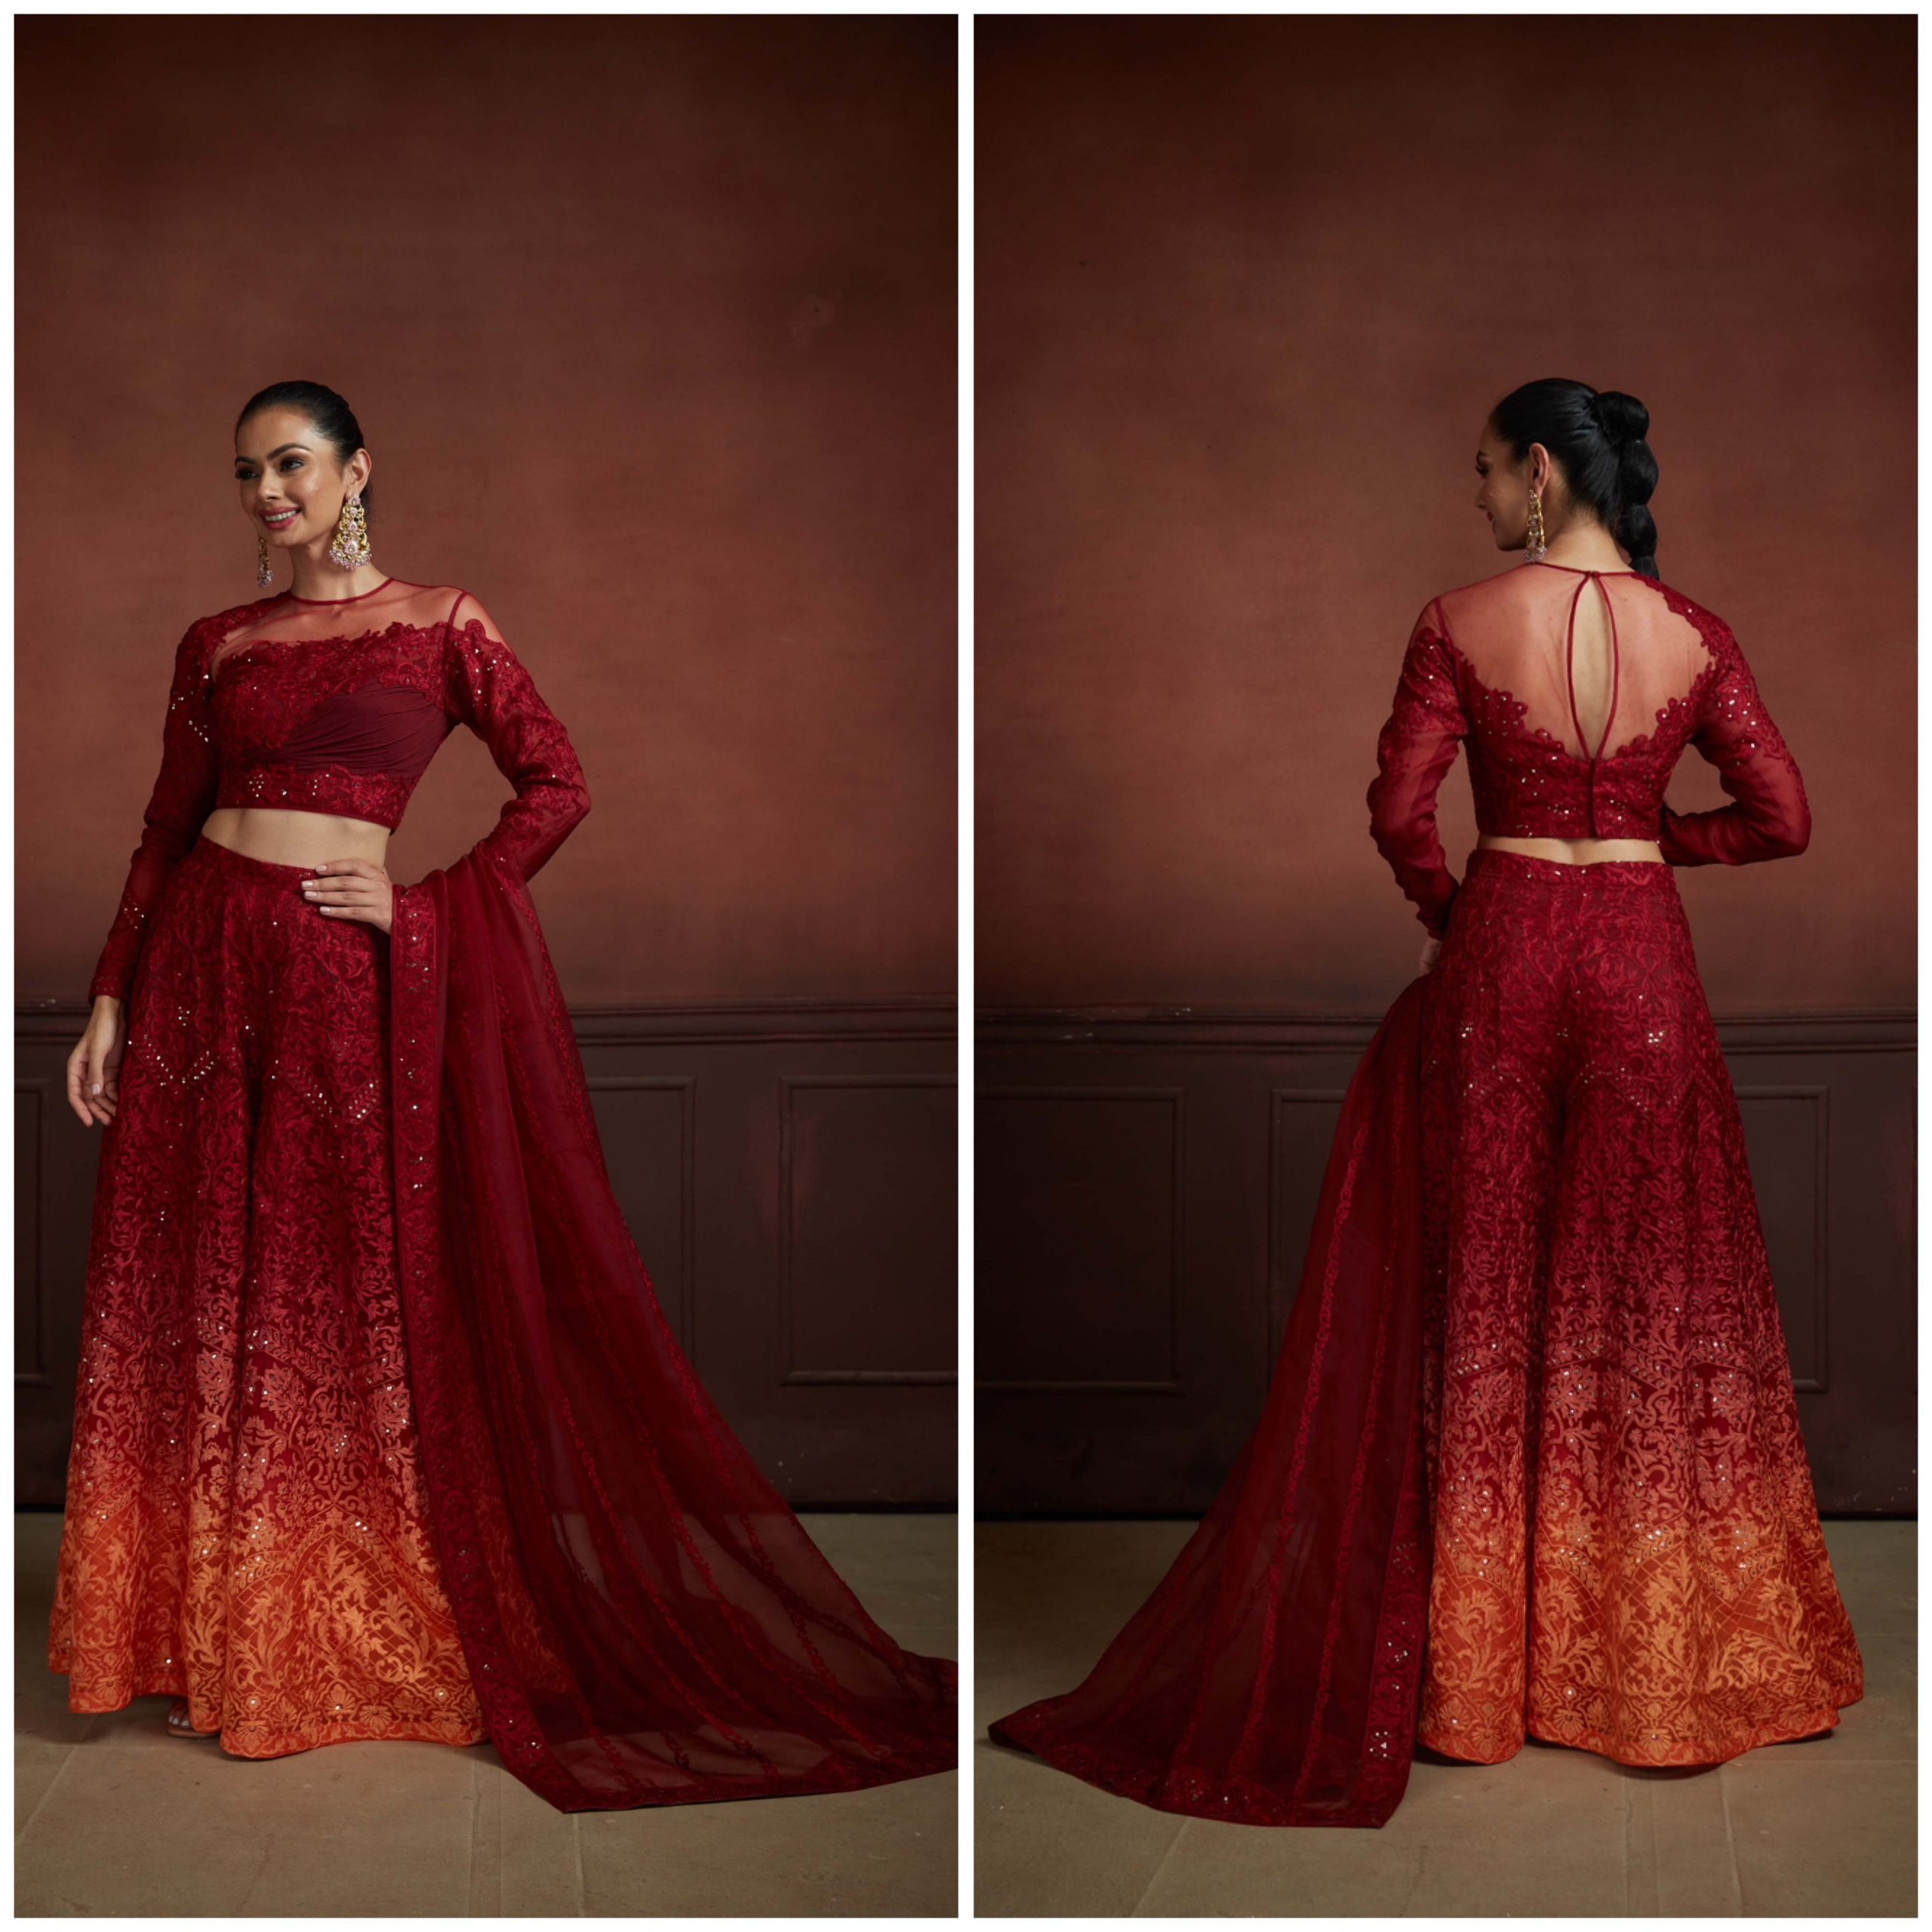 Neeta Lulla Faye Embellished Gown With Trail | Red, Crystals, Gown, Plunged  V-neck, Sleeveless | Embellished gown, Gowns, Ladies gown